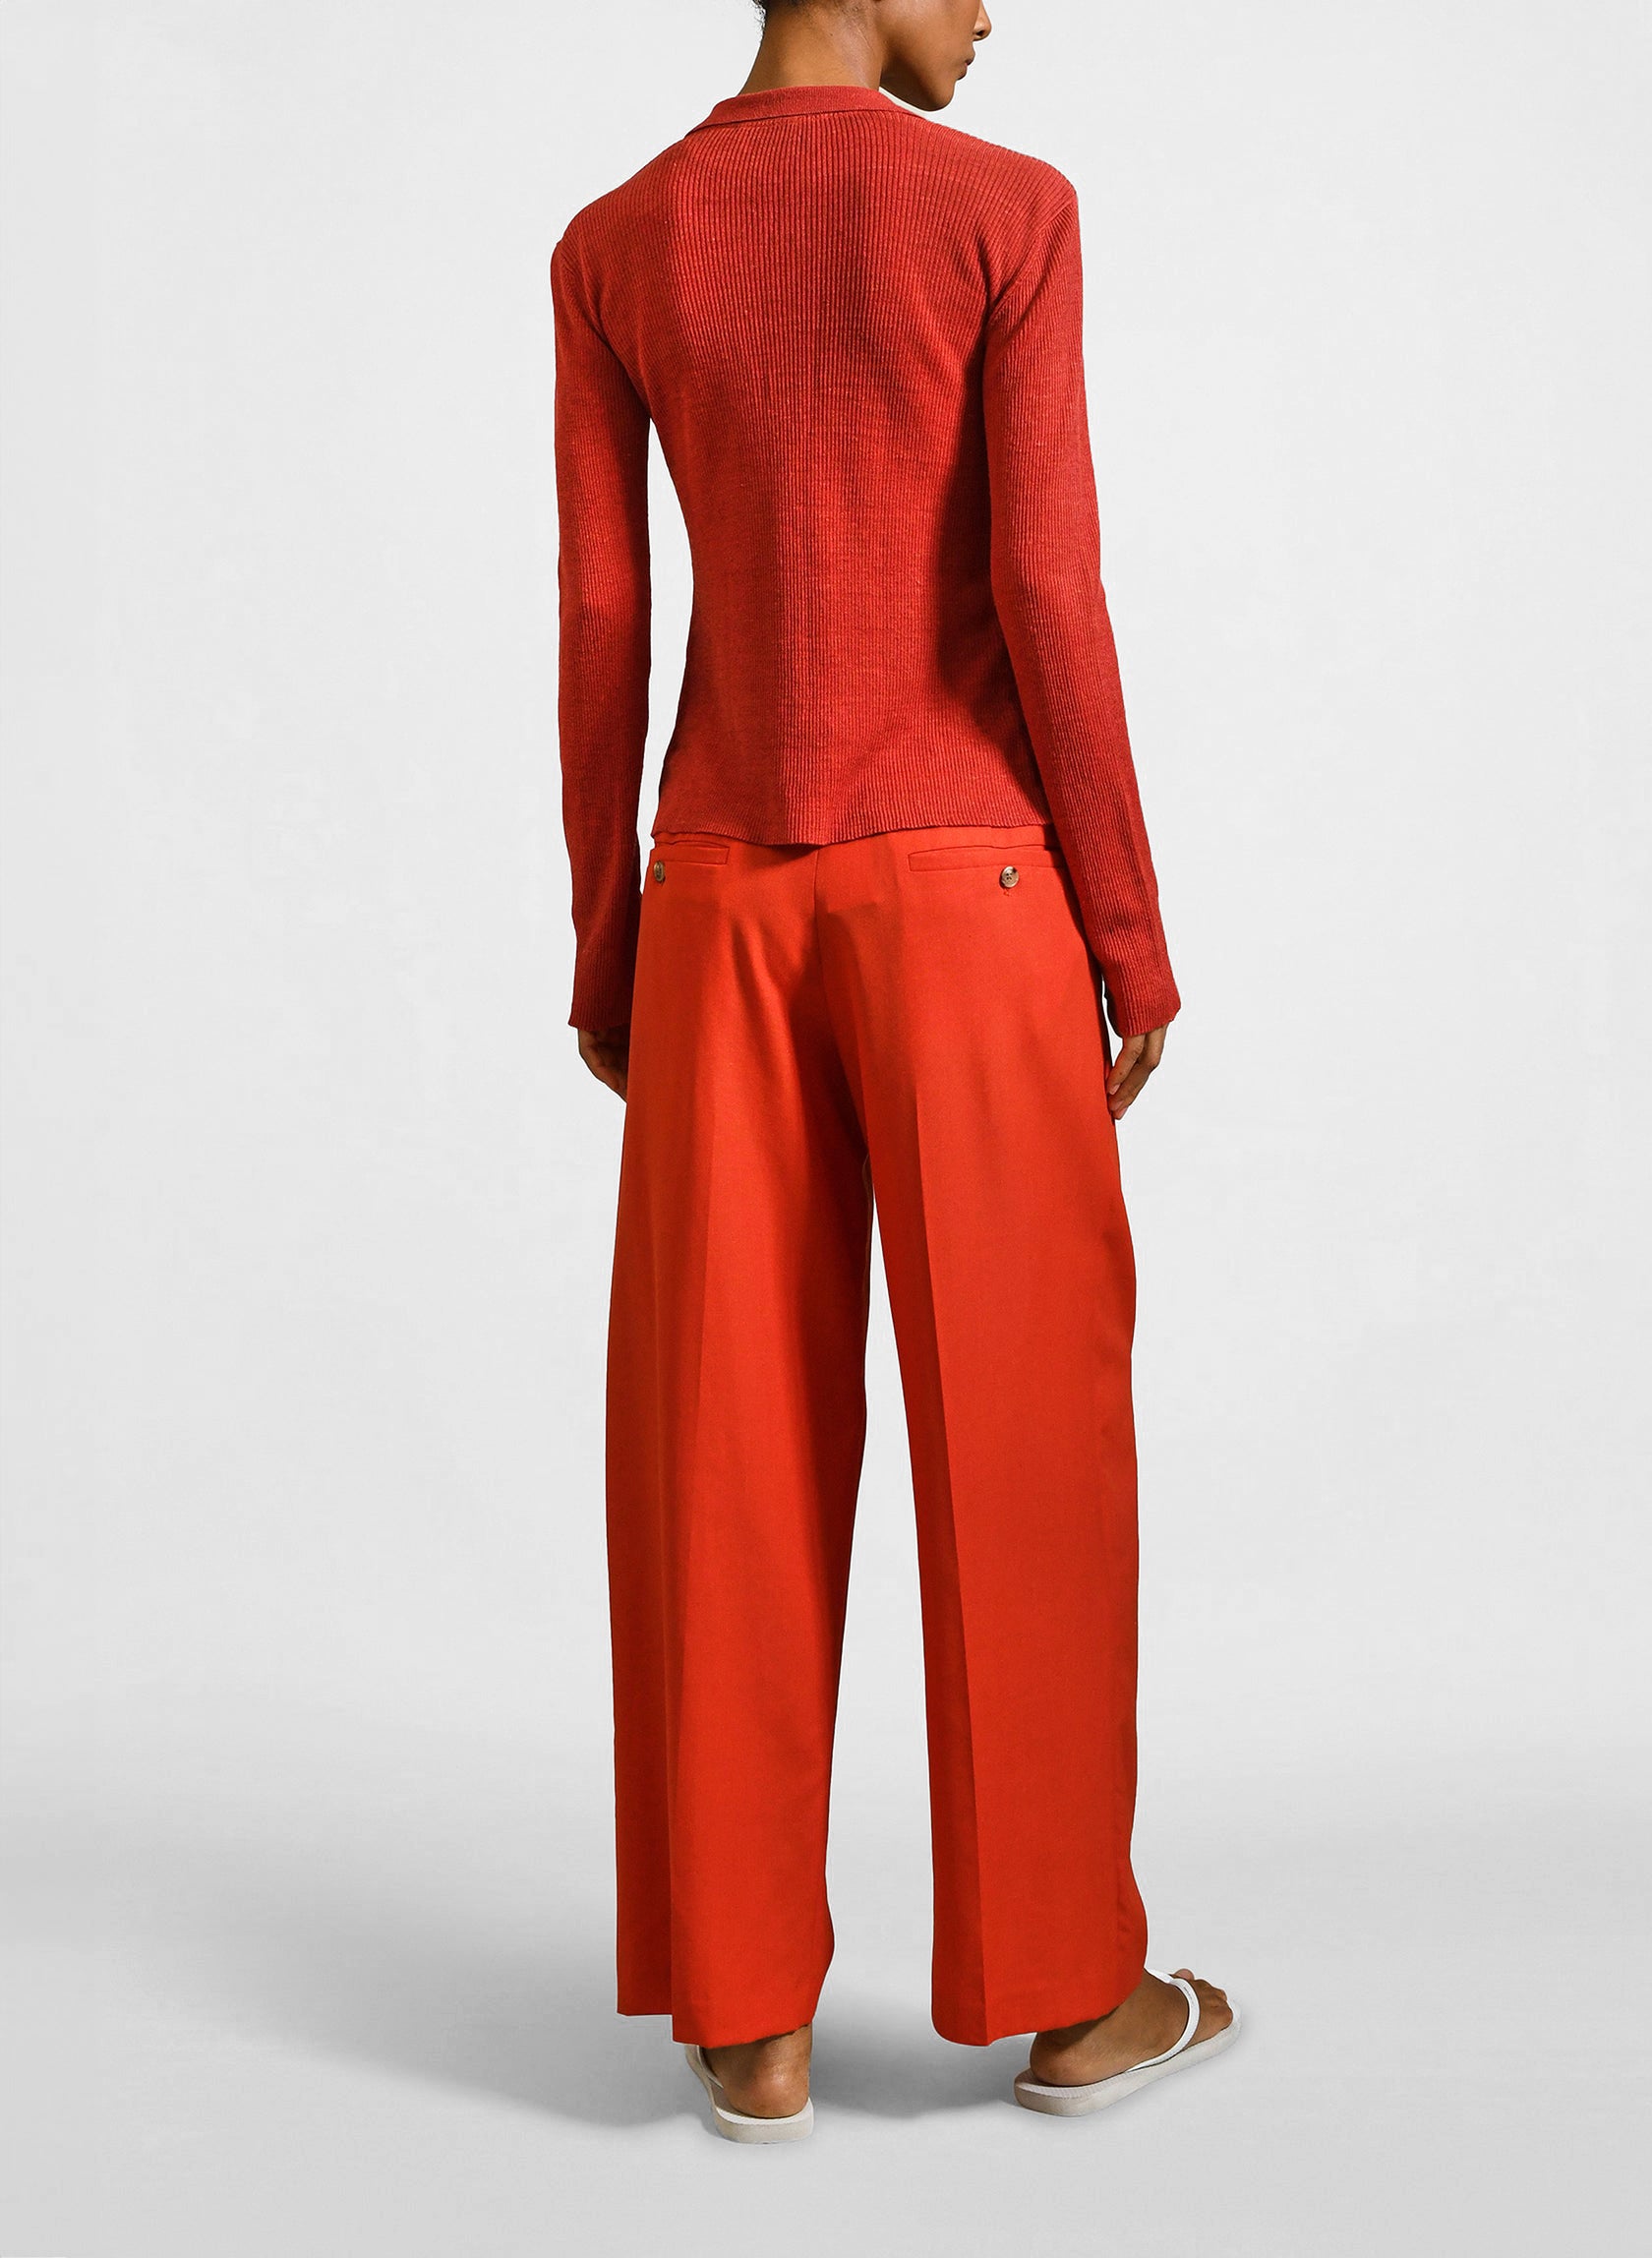 Cropped Slinky Cardigan in Tomato Viscose Linen